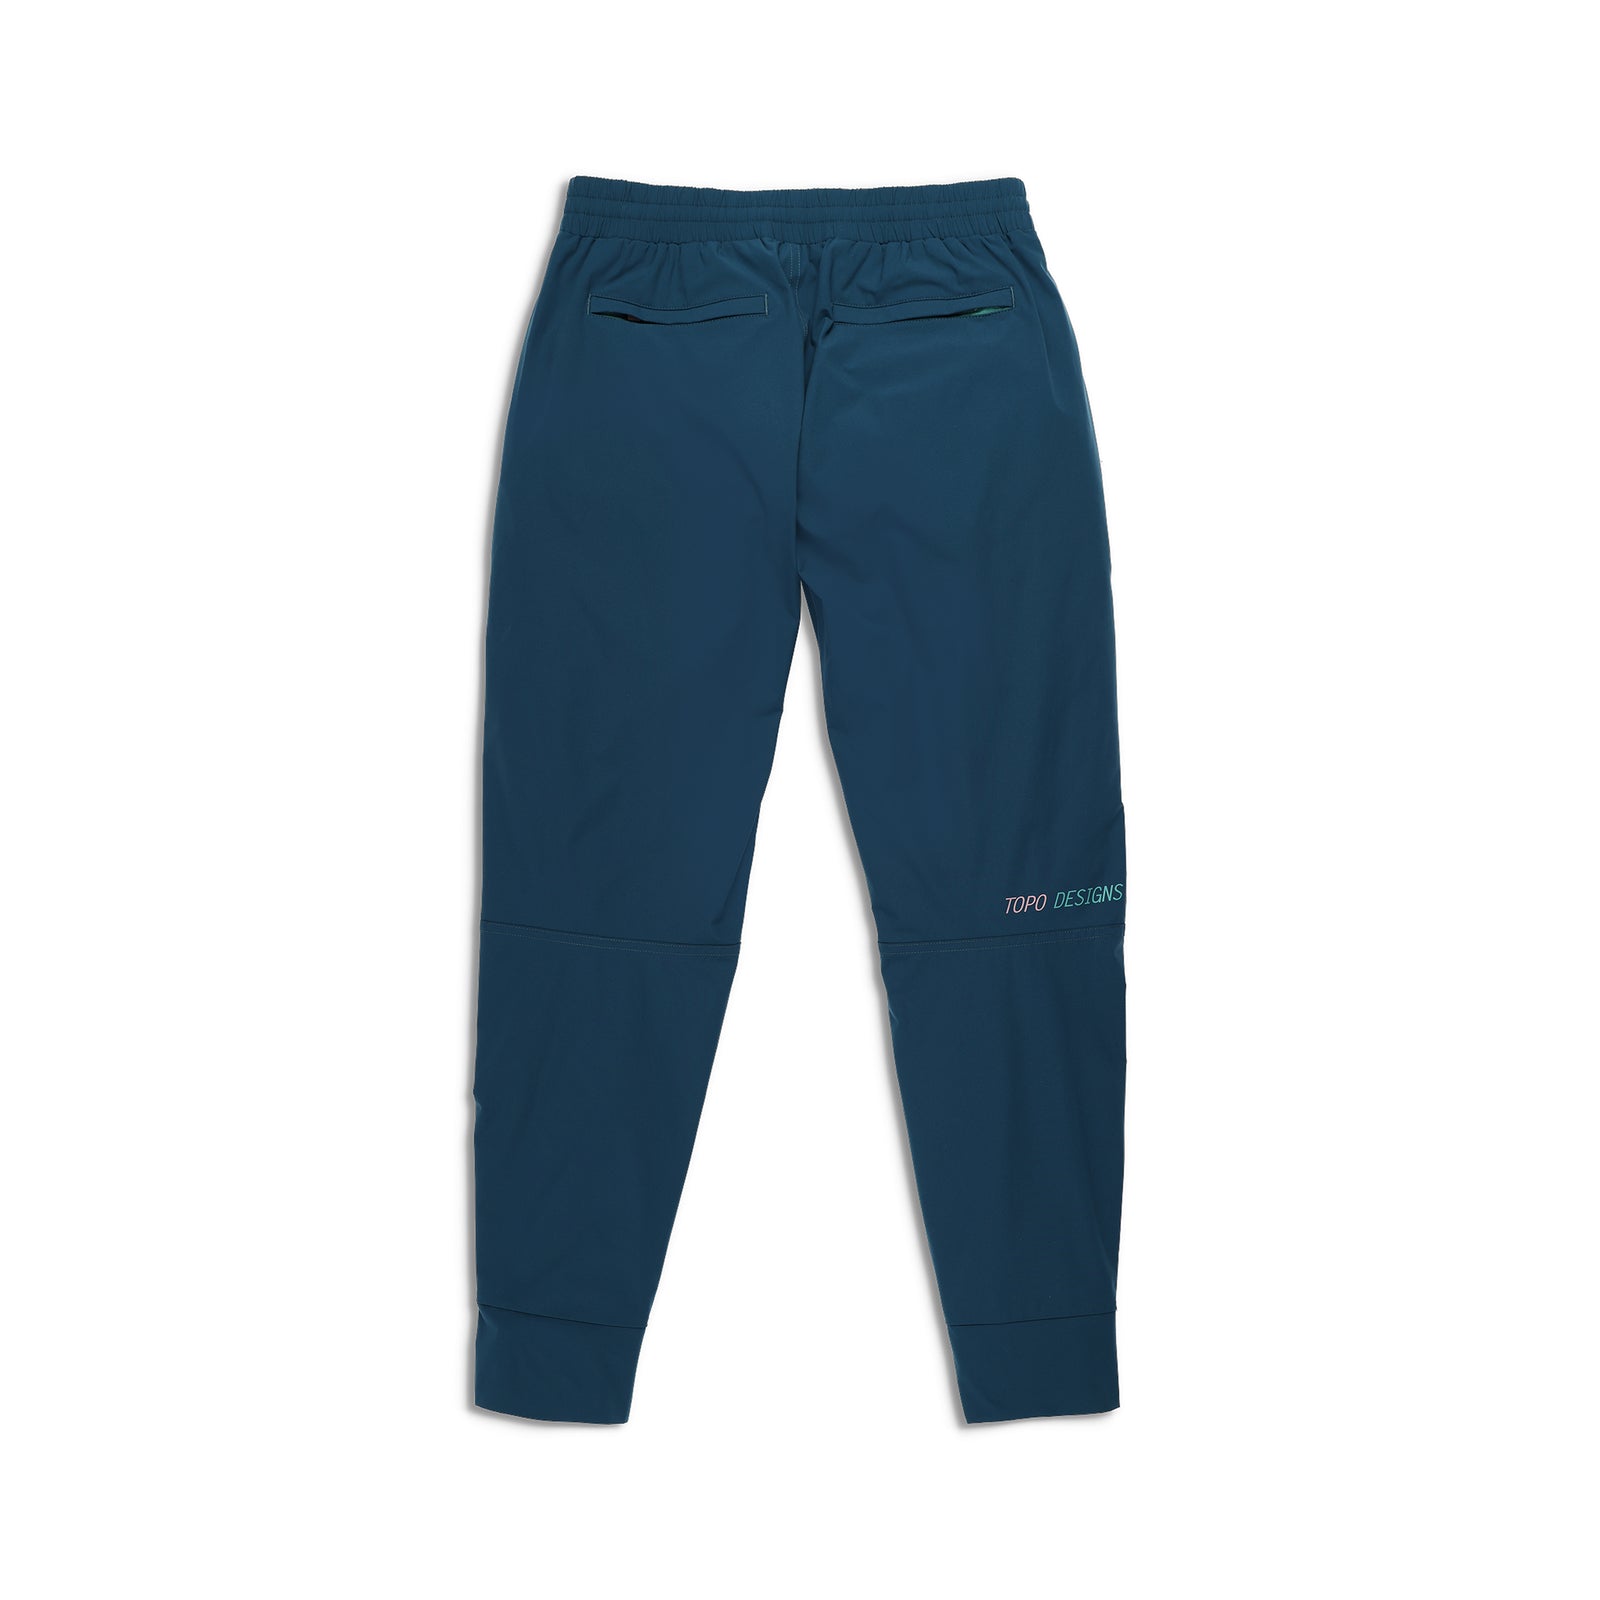 Back View of Topo Designs Global Jogger - Women's in "Pond Blue"